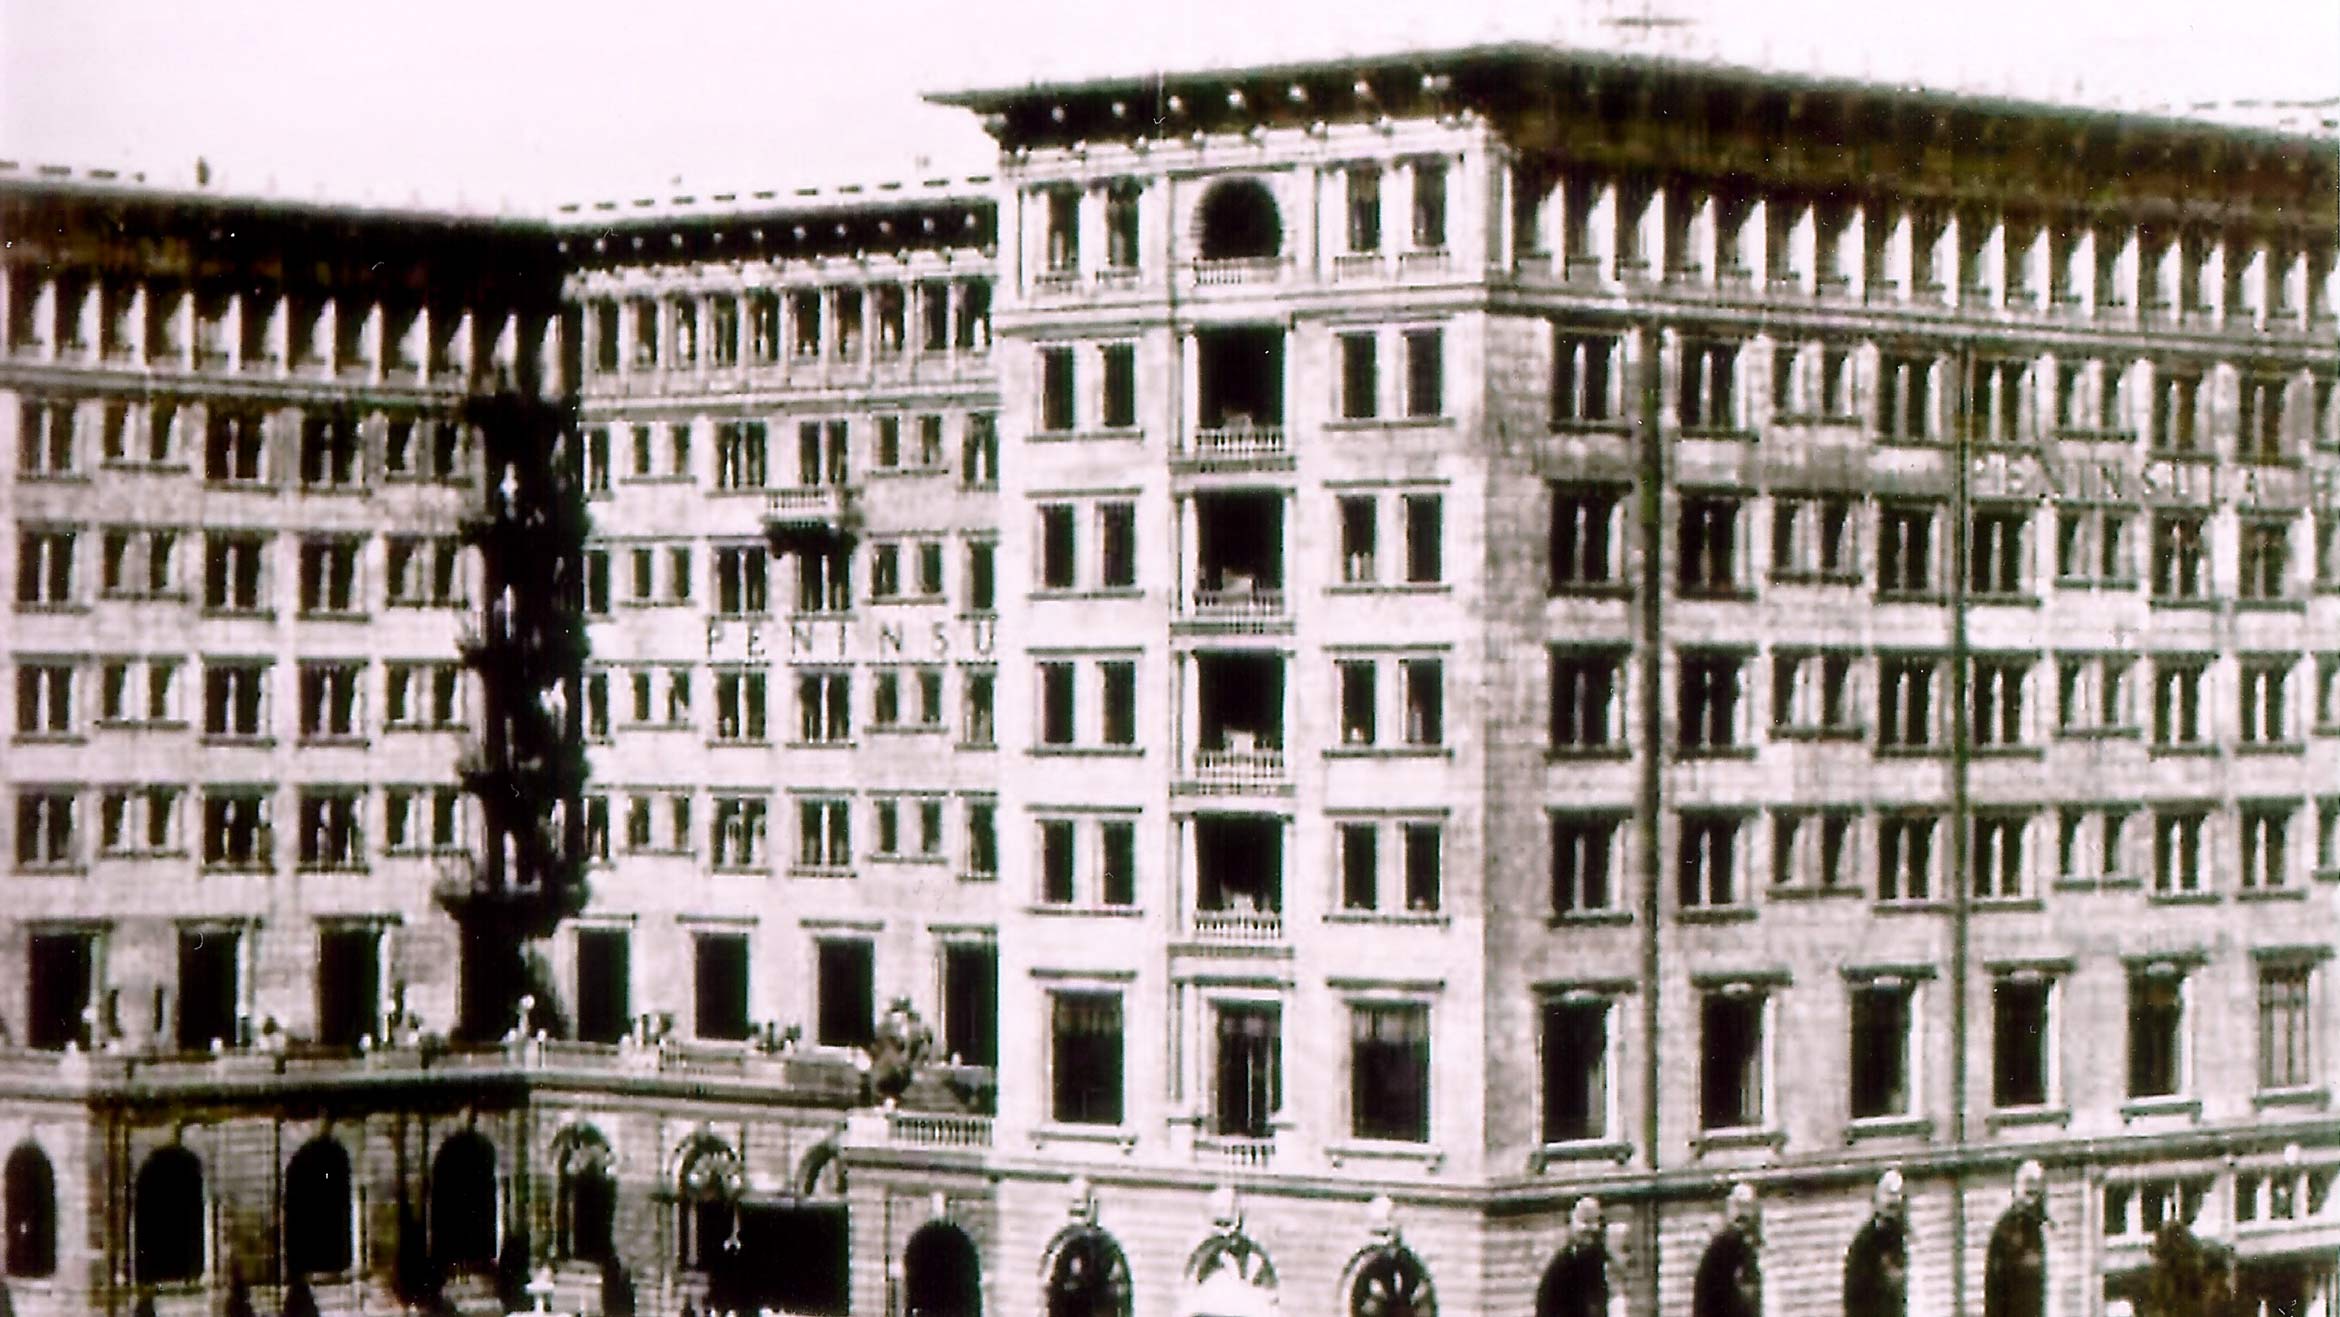 The Peninsula Hotel pictured after opening in1928 